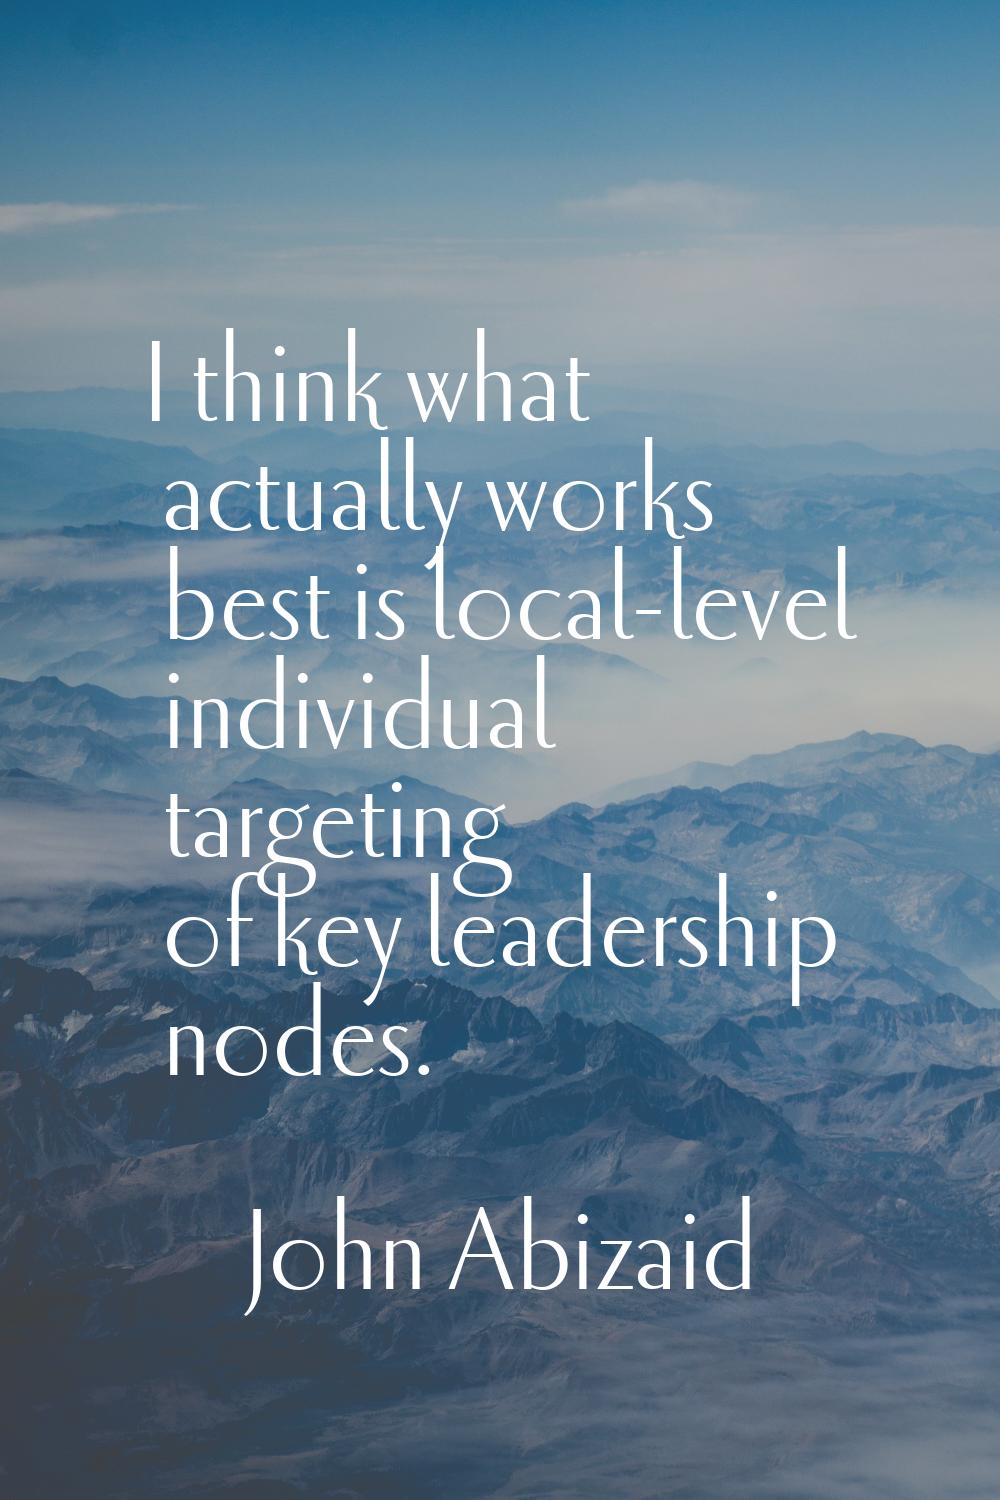 I think what actually works best is local-level individual targeting of key leadership nodes.